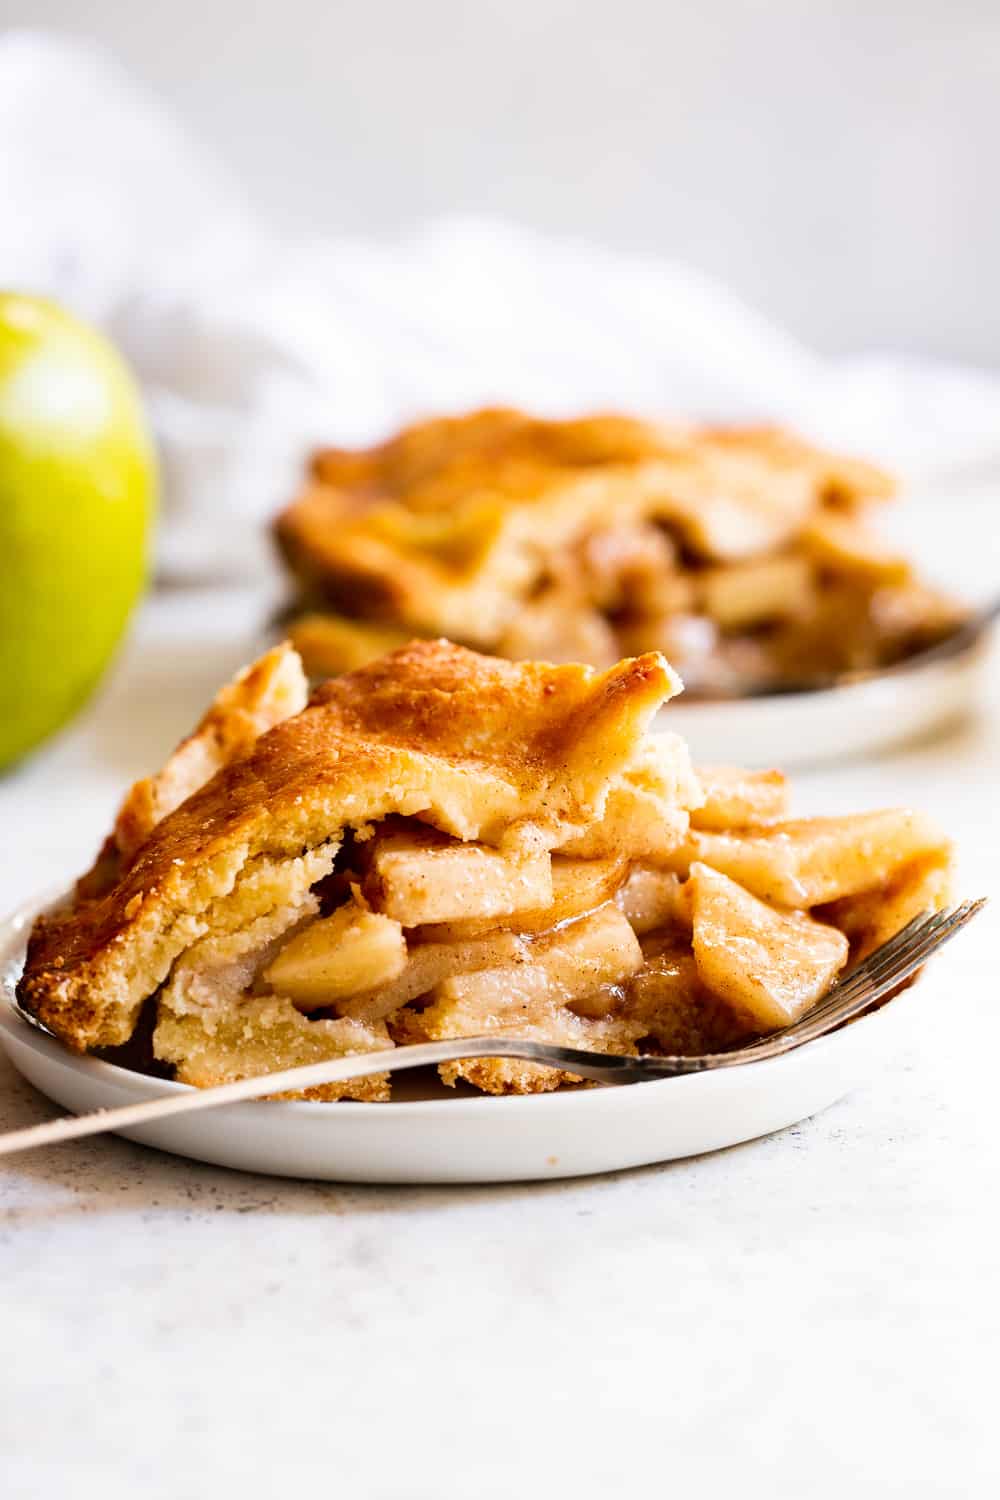 This classic Paleo Apple Pie has an easy double crust made with a dairy free option and is loaded with juicy gooey apples, warm spices and sweetened naturally with pure maple sugar.  It's a family favorite and perfect for Thanksgiving or any special celebration this fall!  #paleo #applepie #glutenfree #apples #cleaneating #paleobaking #glutenfreebaking